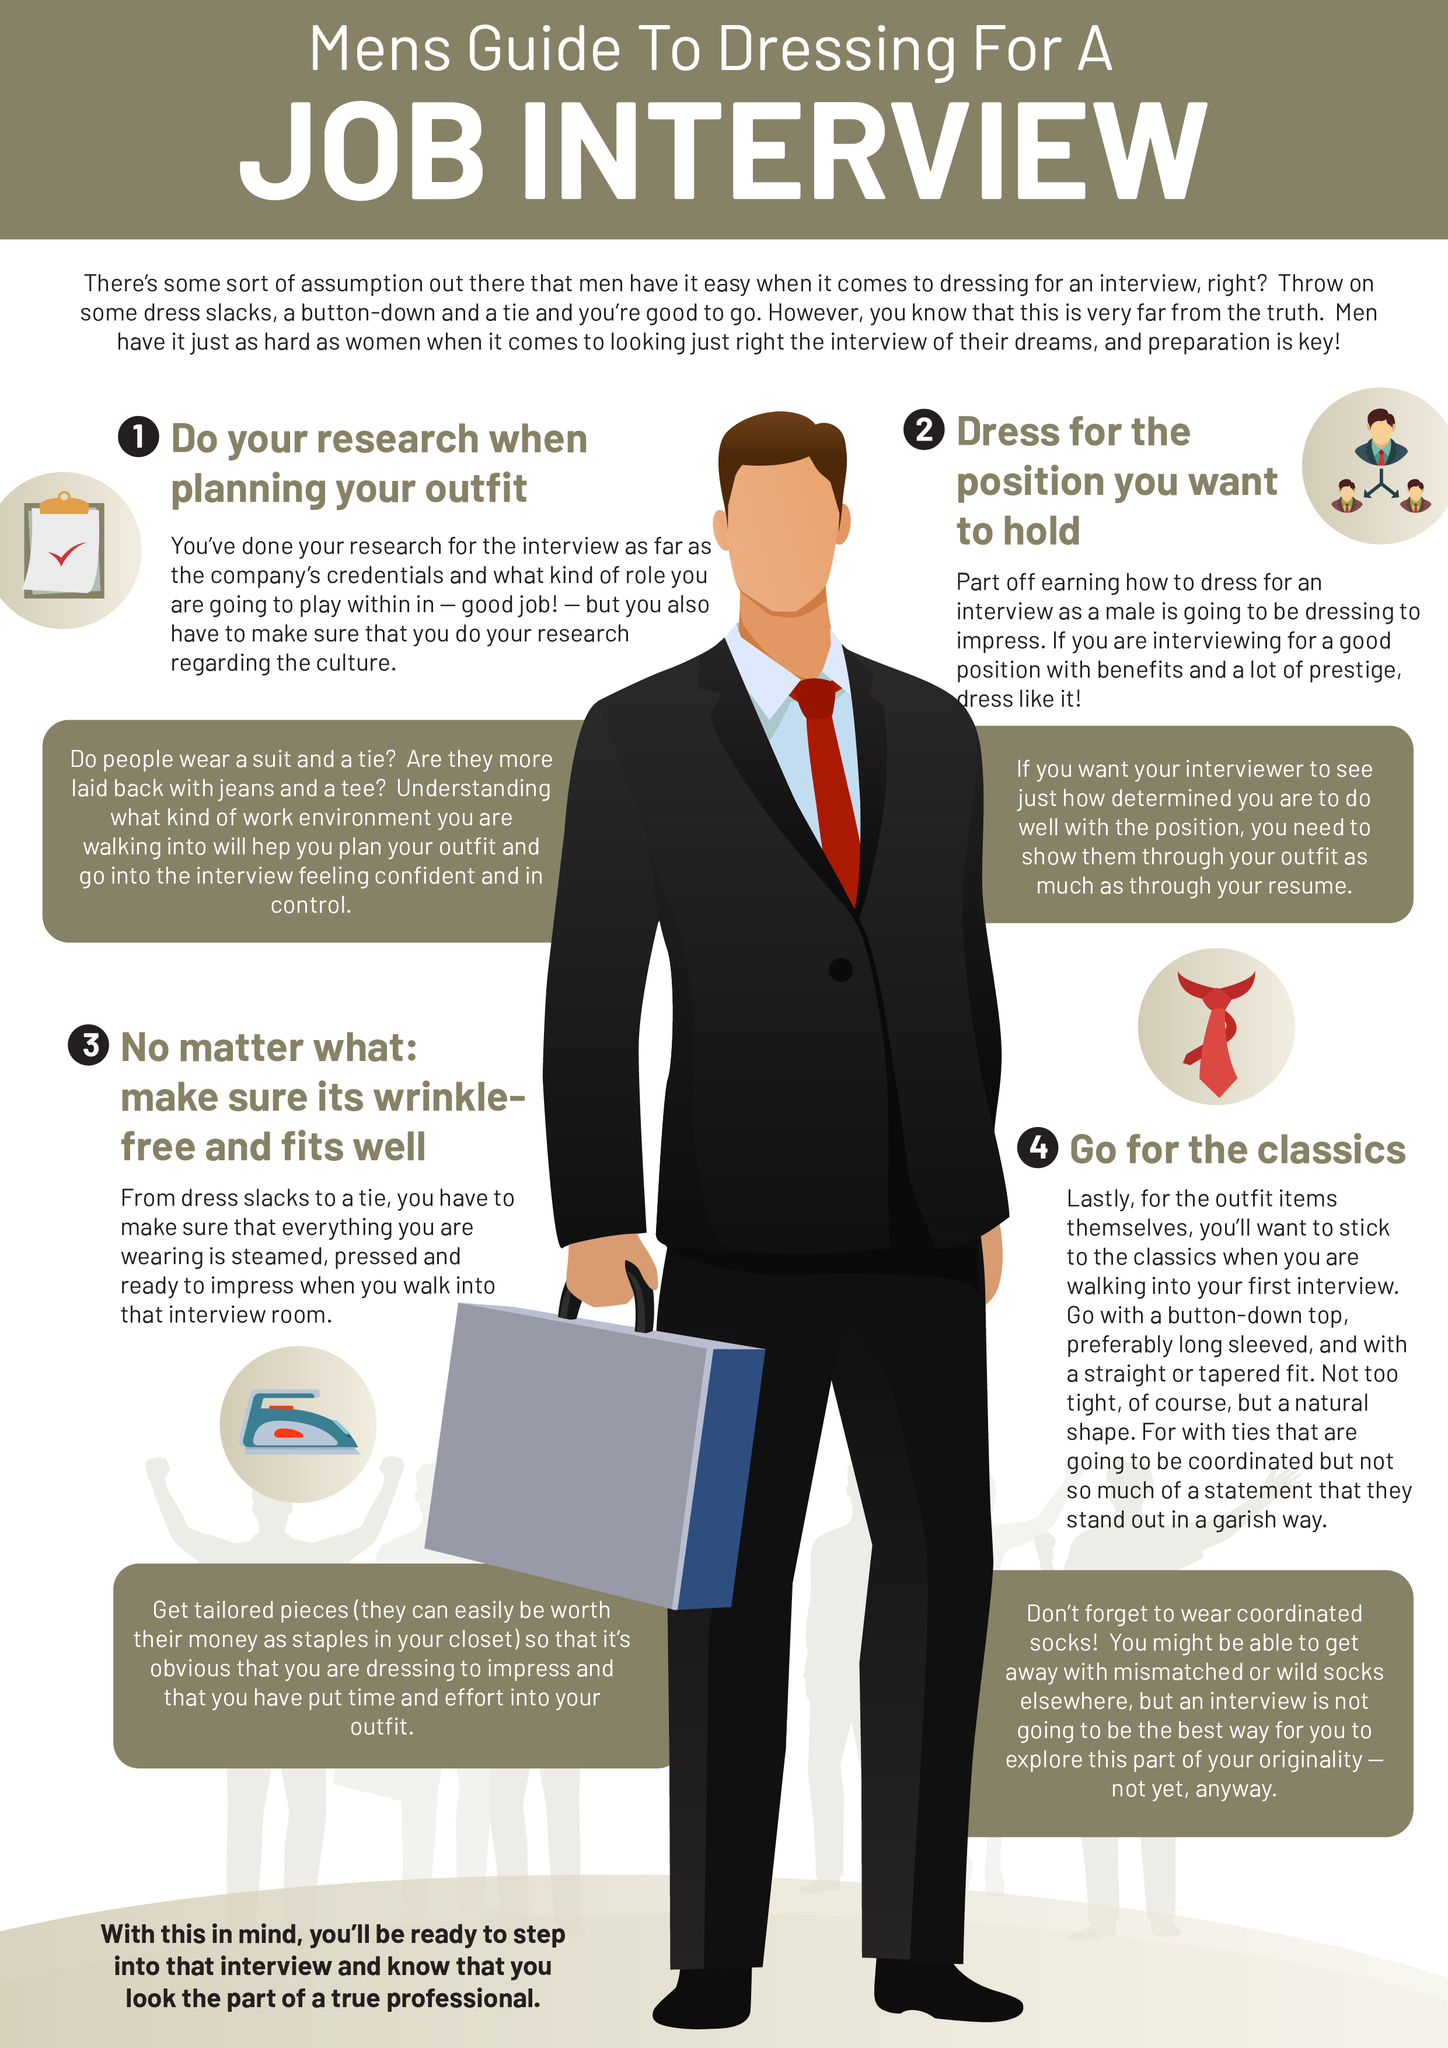 Men's Guide To Dressing For A Job Interview